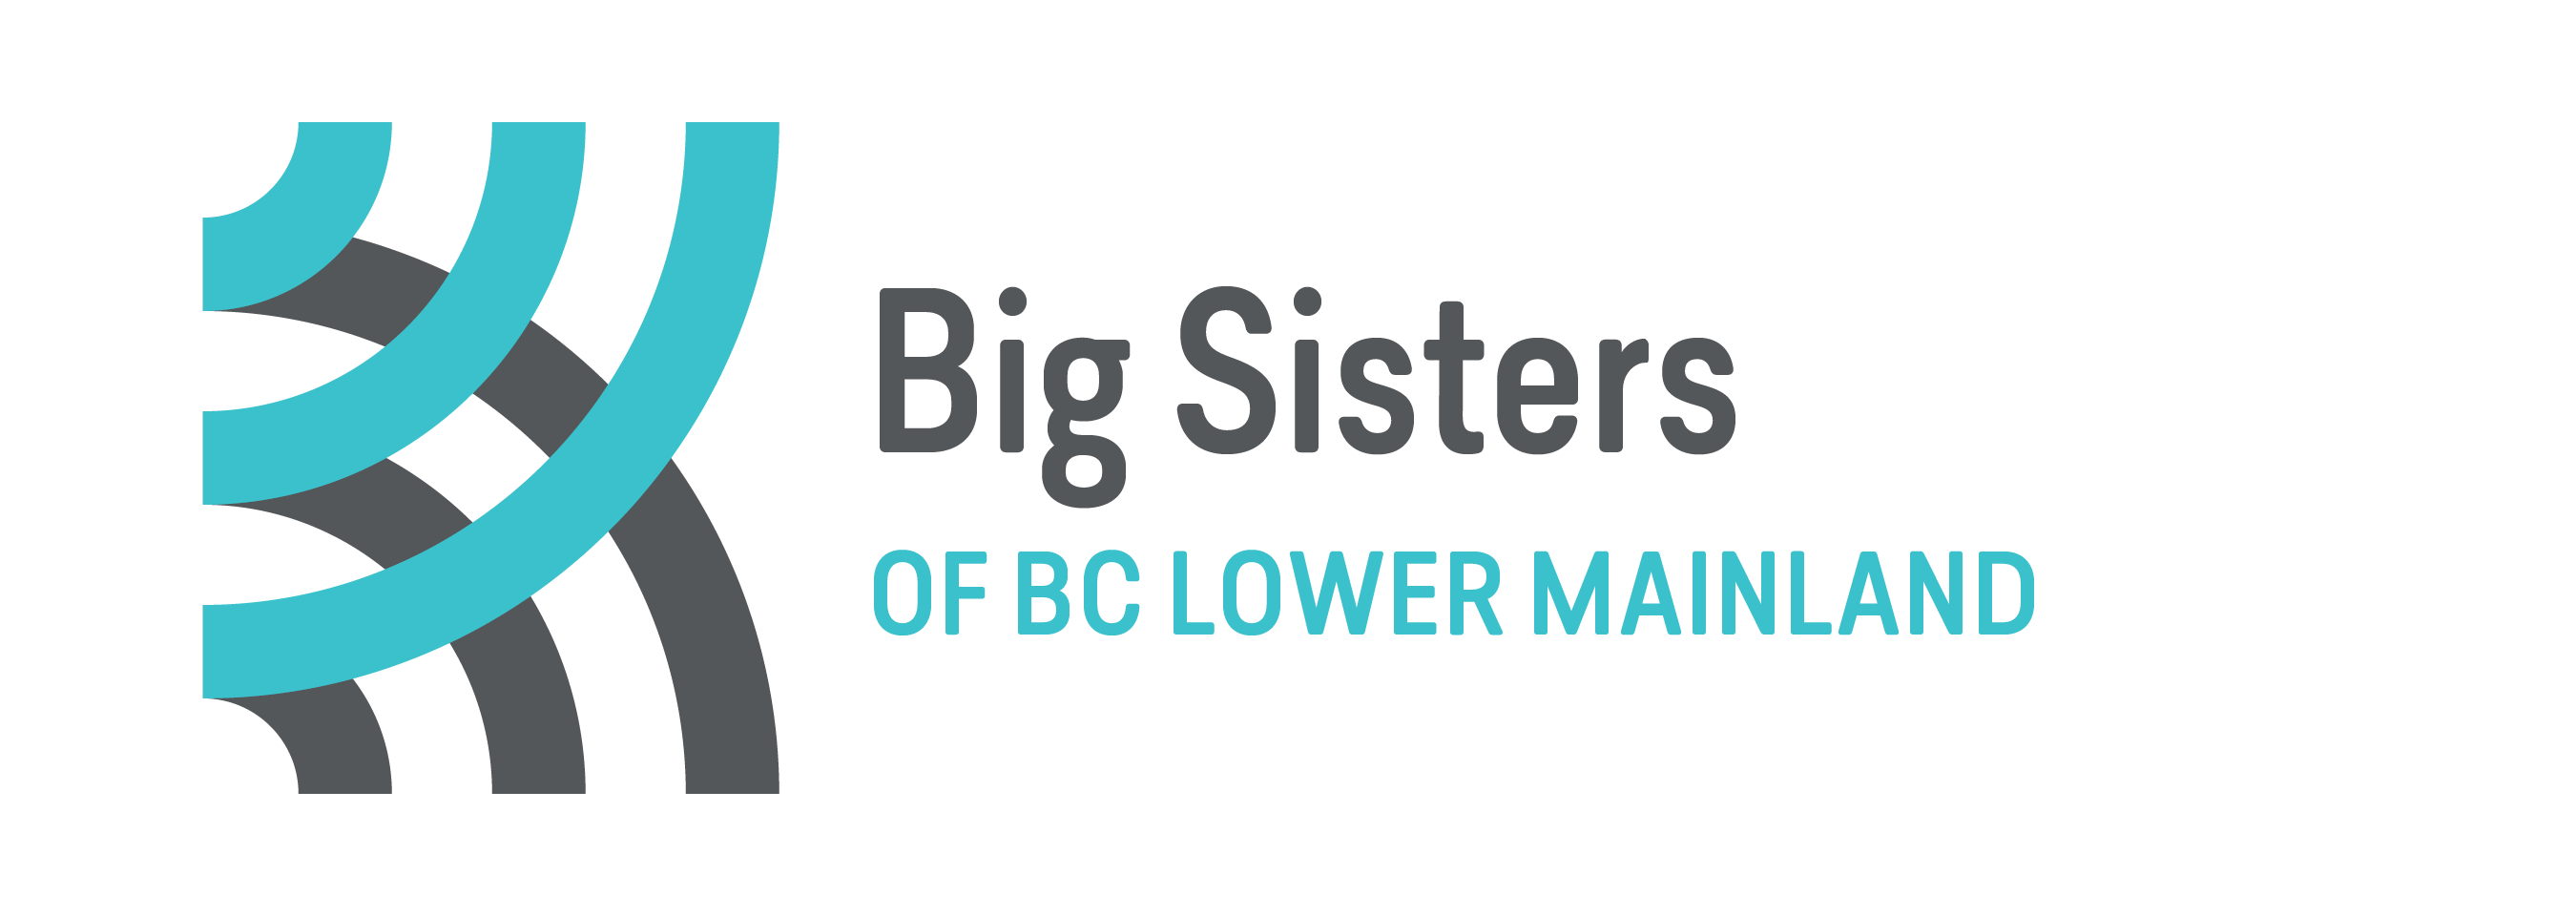 Big Sisters of BC Lower Mainland